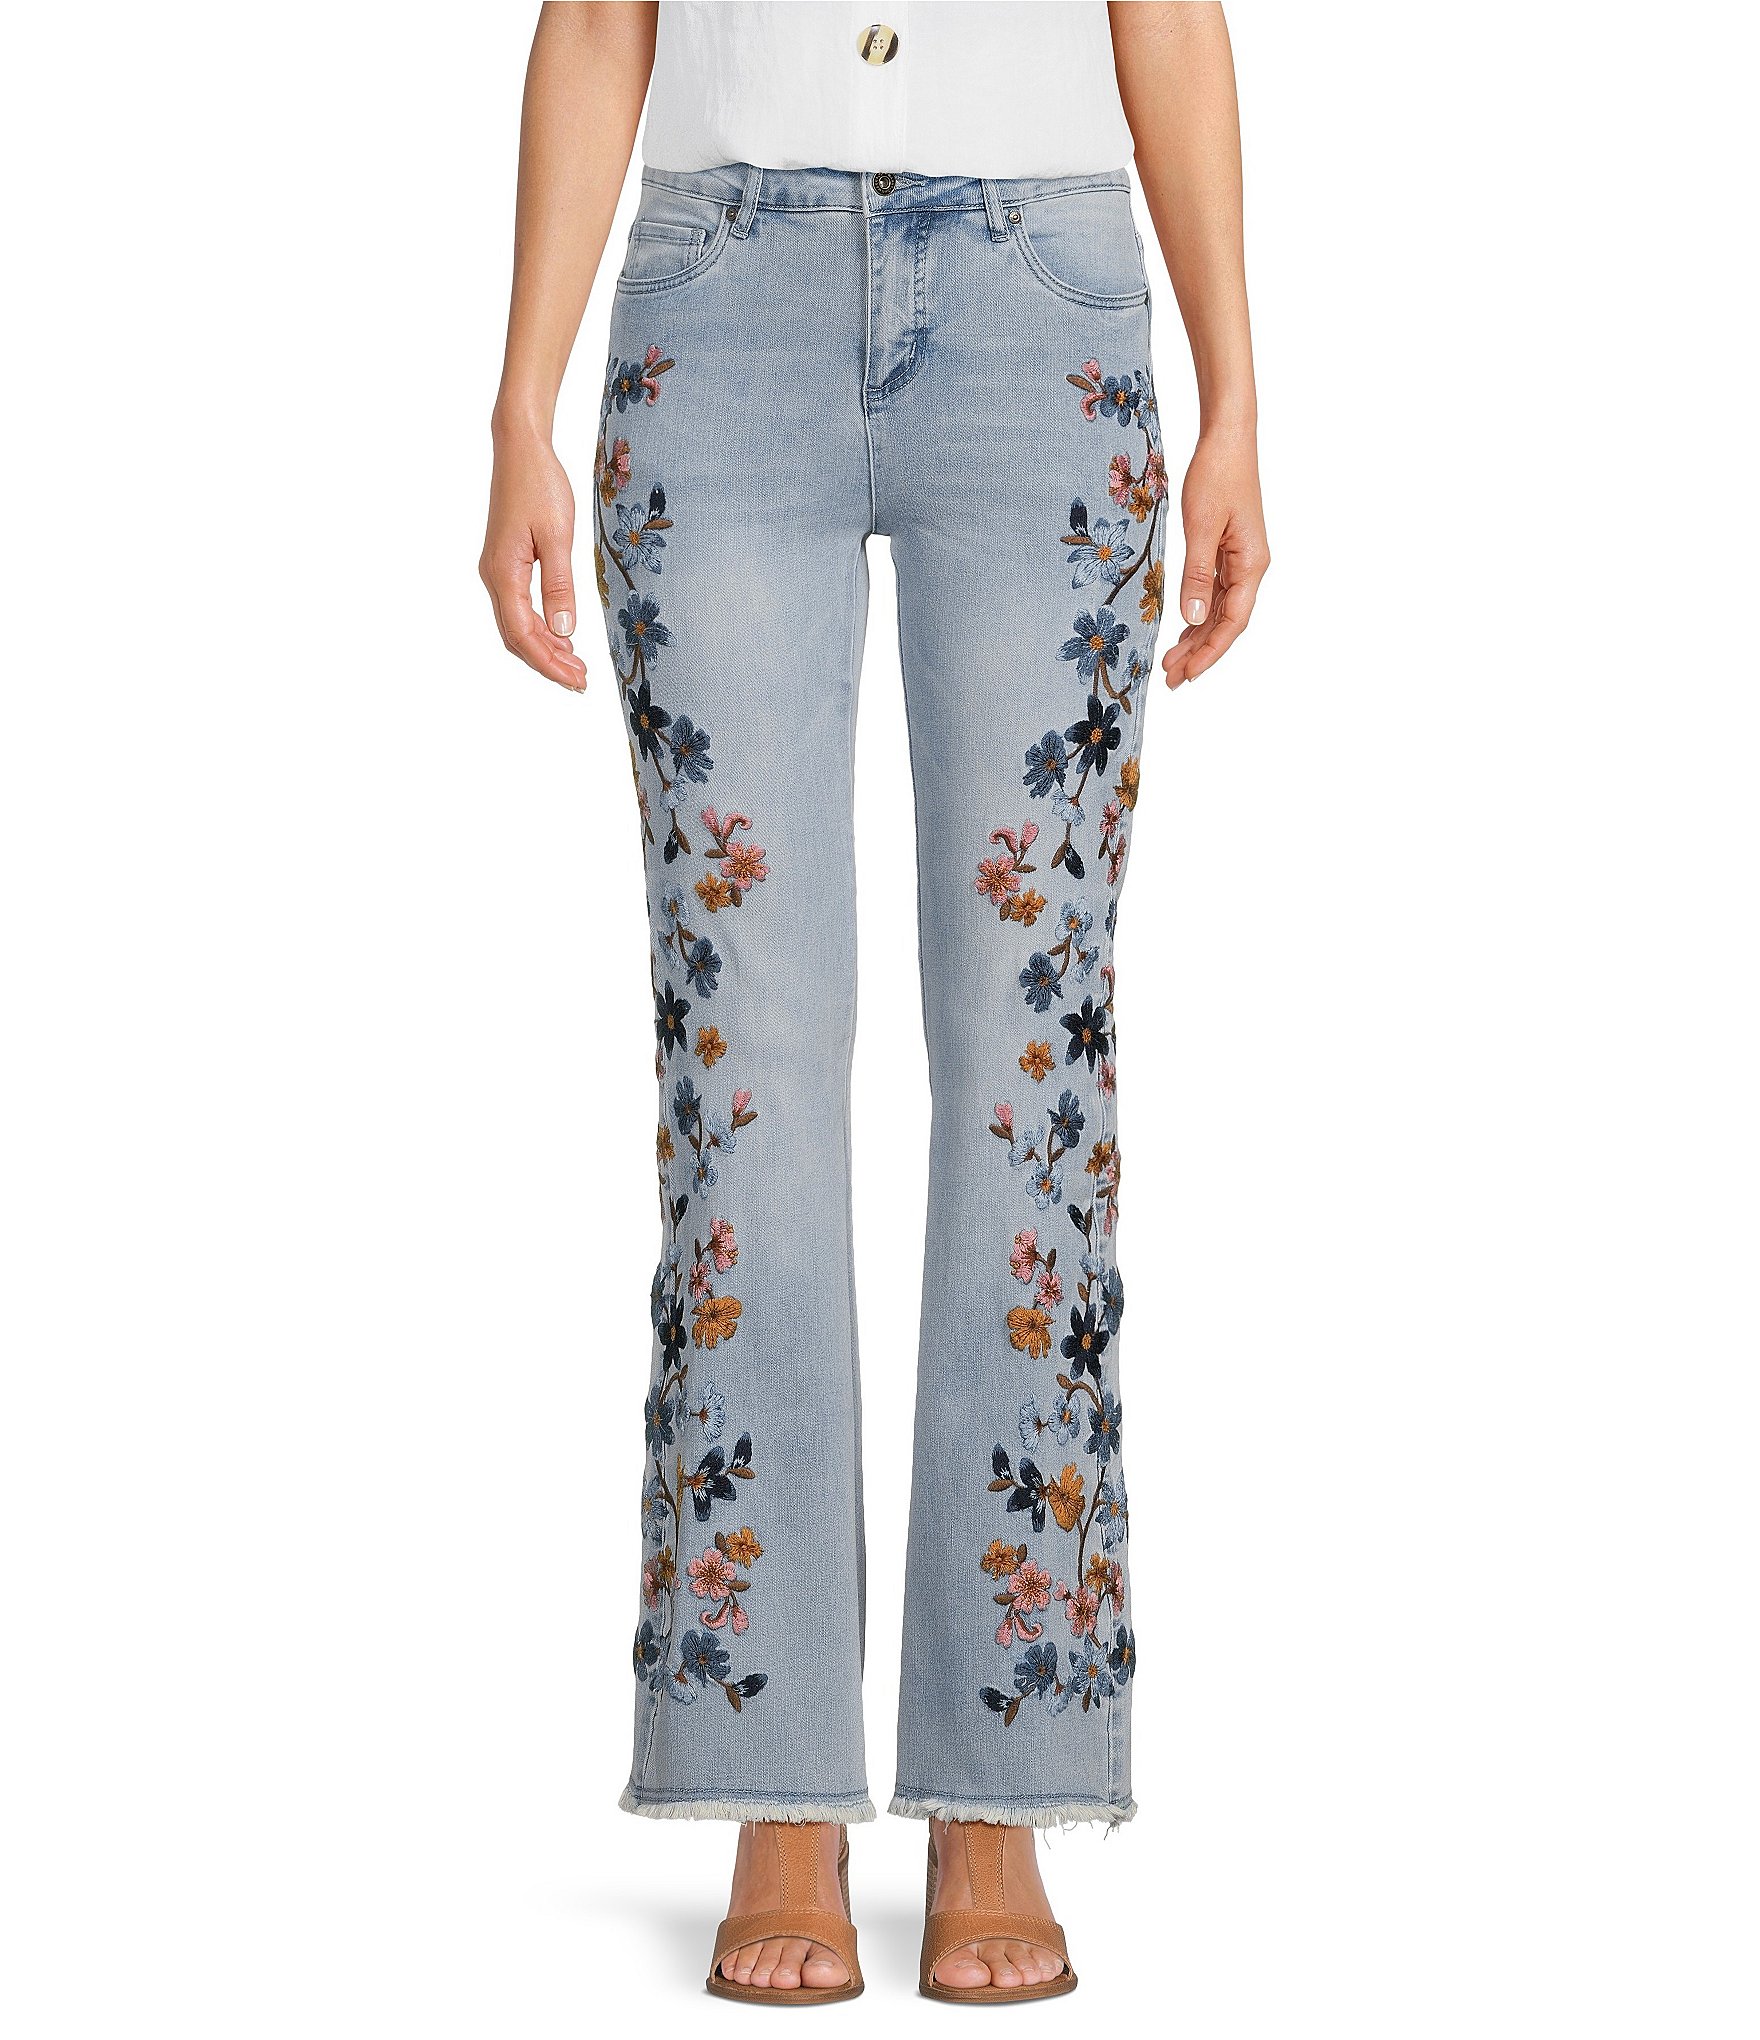 Womens Floral Embroidered Bell Bottom Flare Jeans